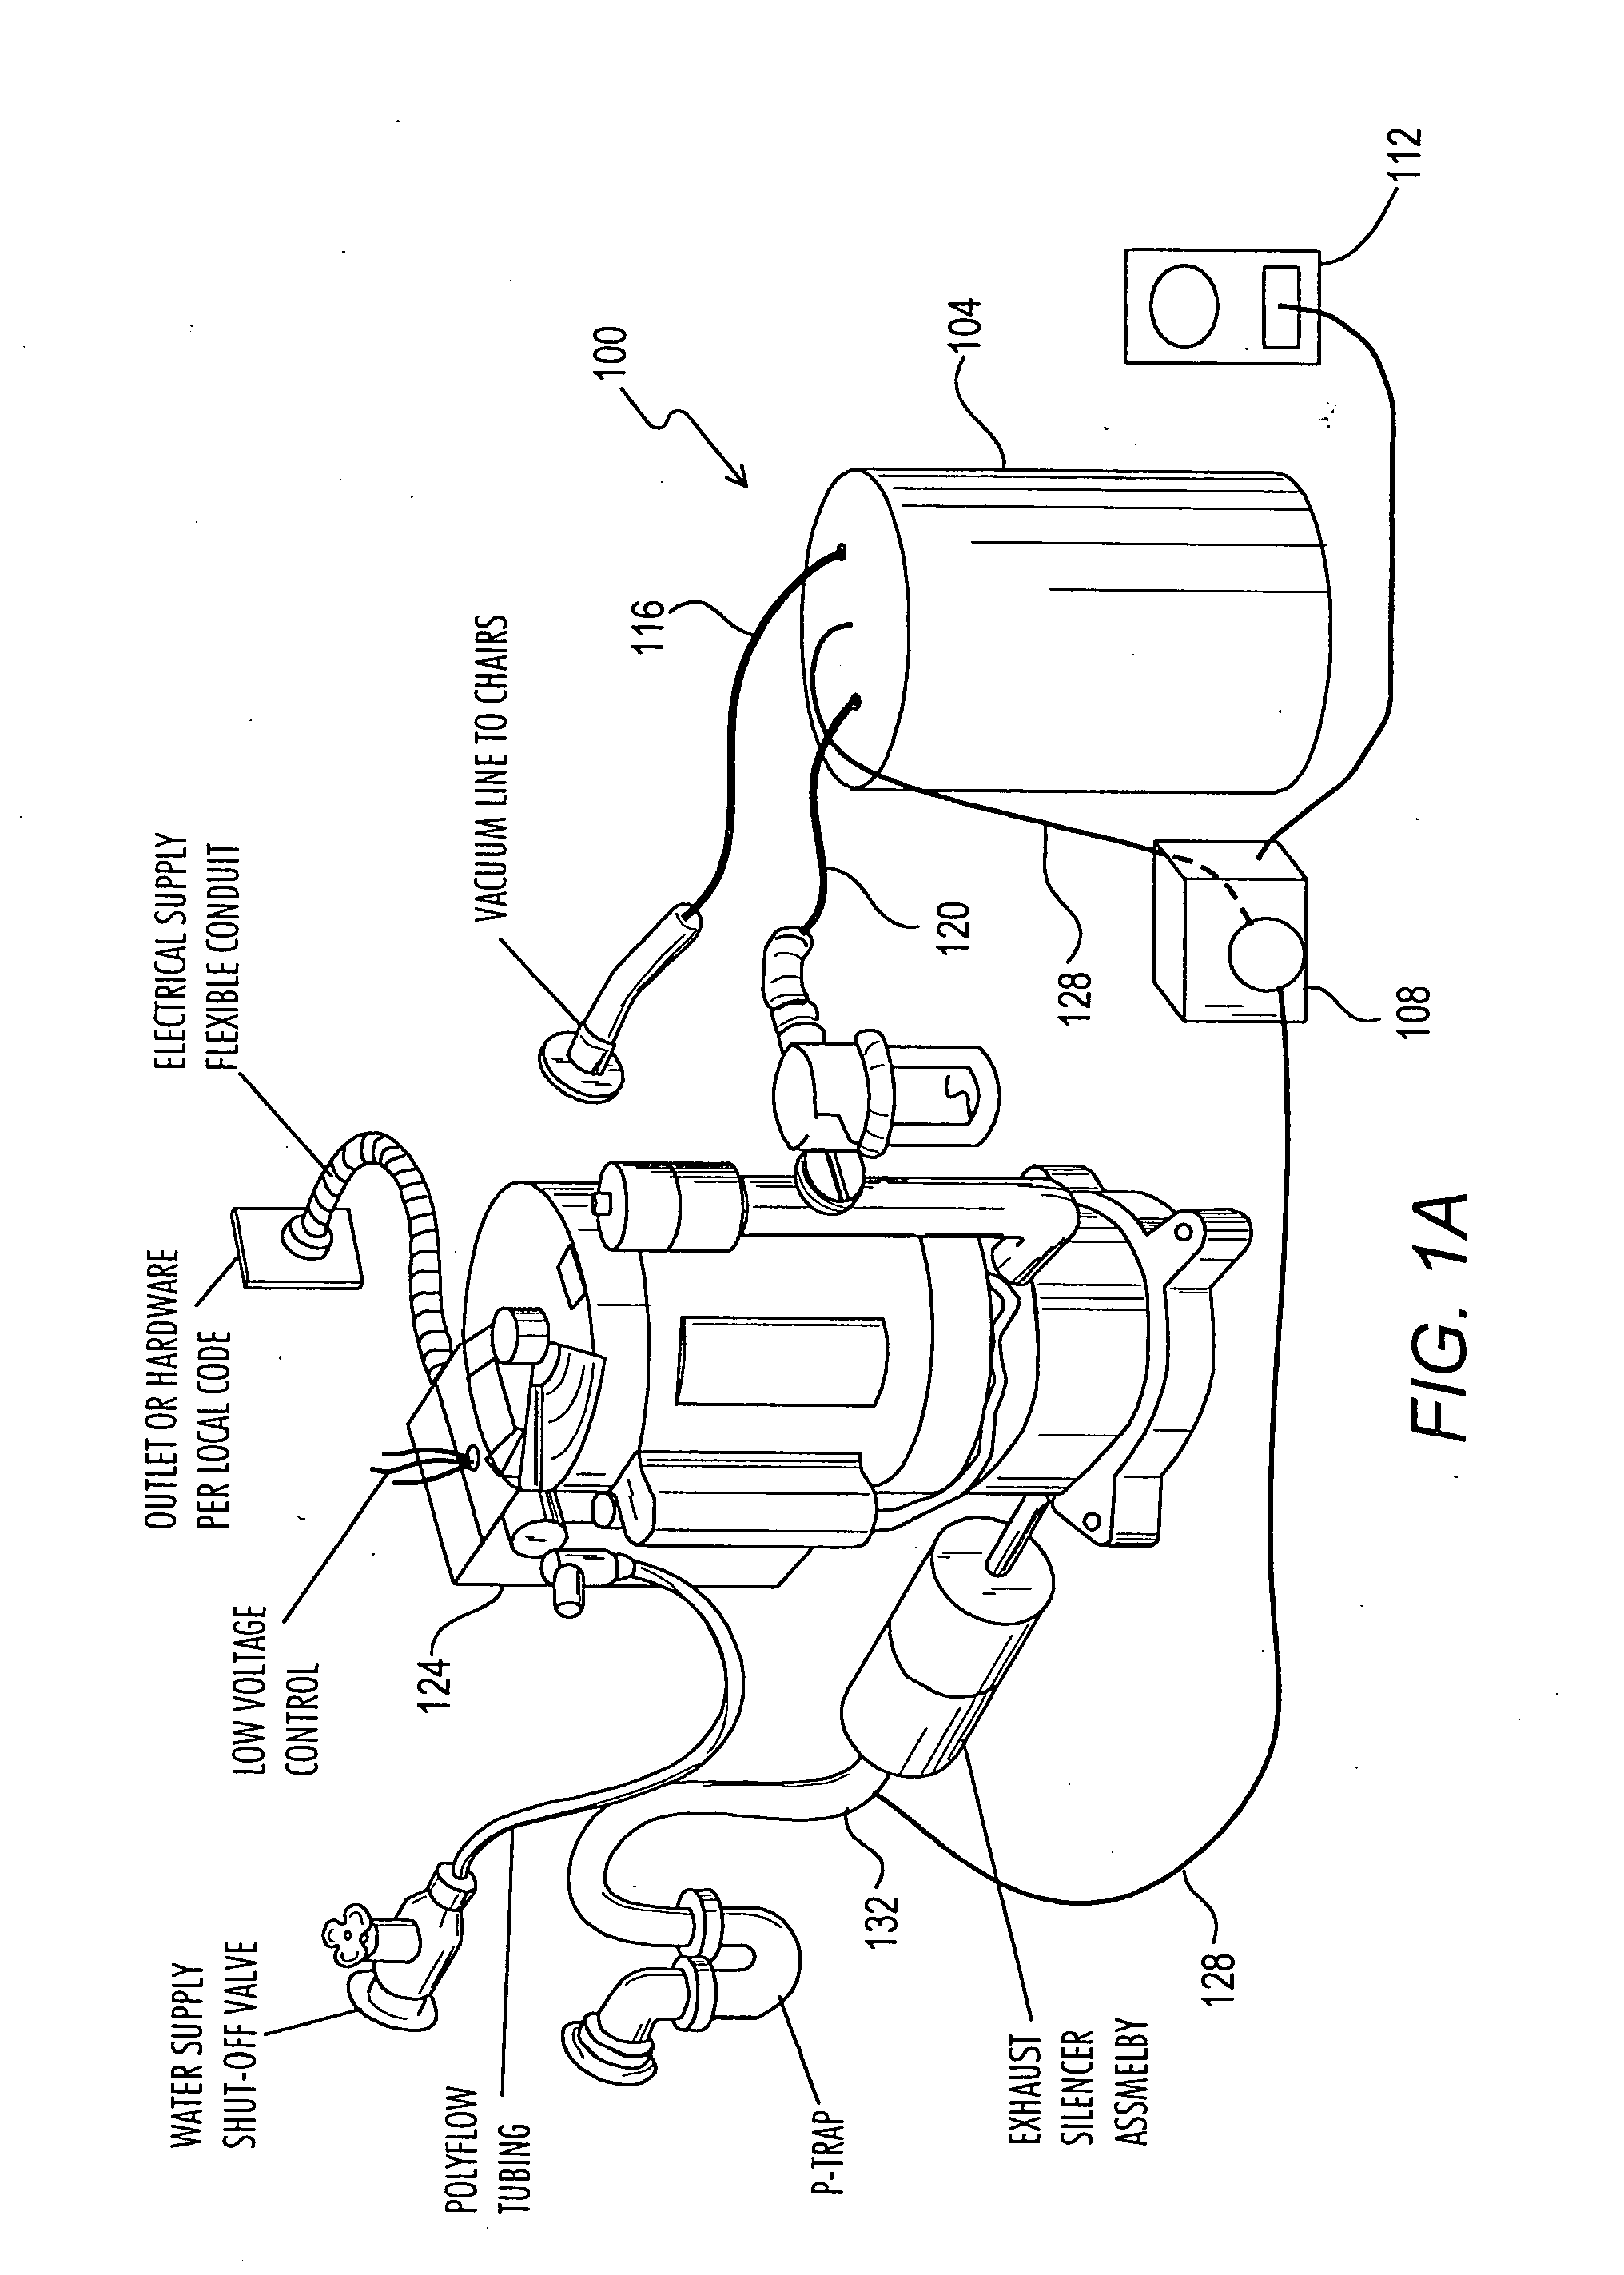 Apparatus and method for removing mercury and mercuric compounds from dental effluents